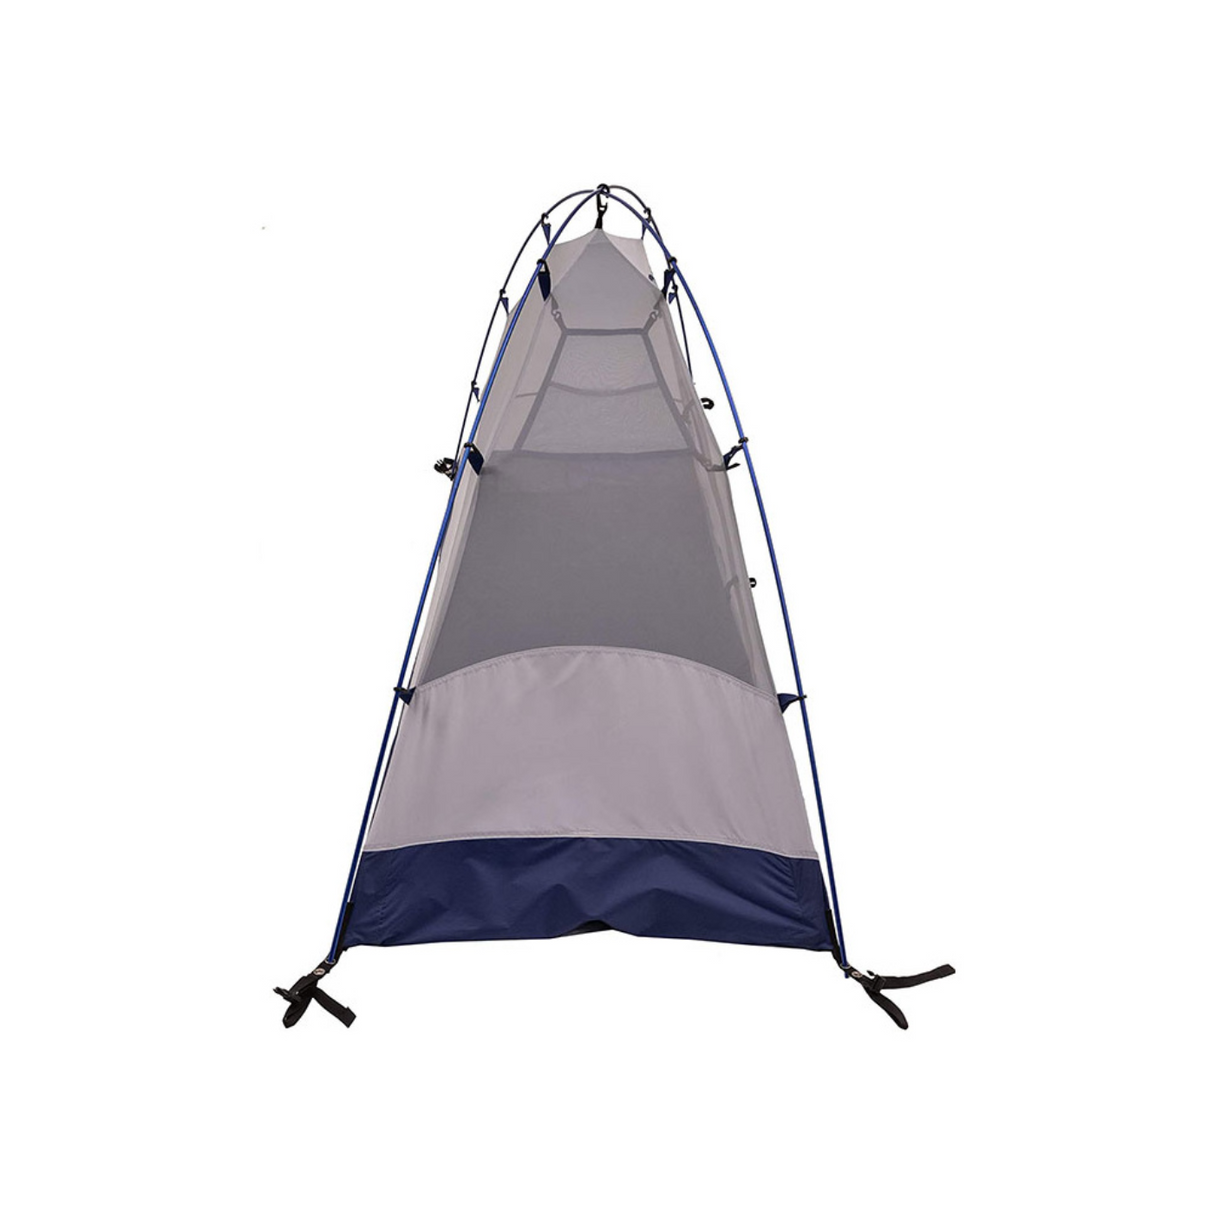 Lynx 1-Person Tent